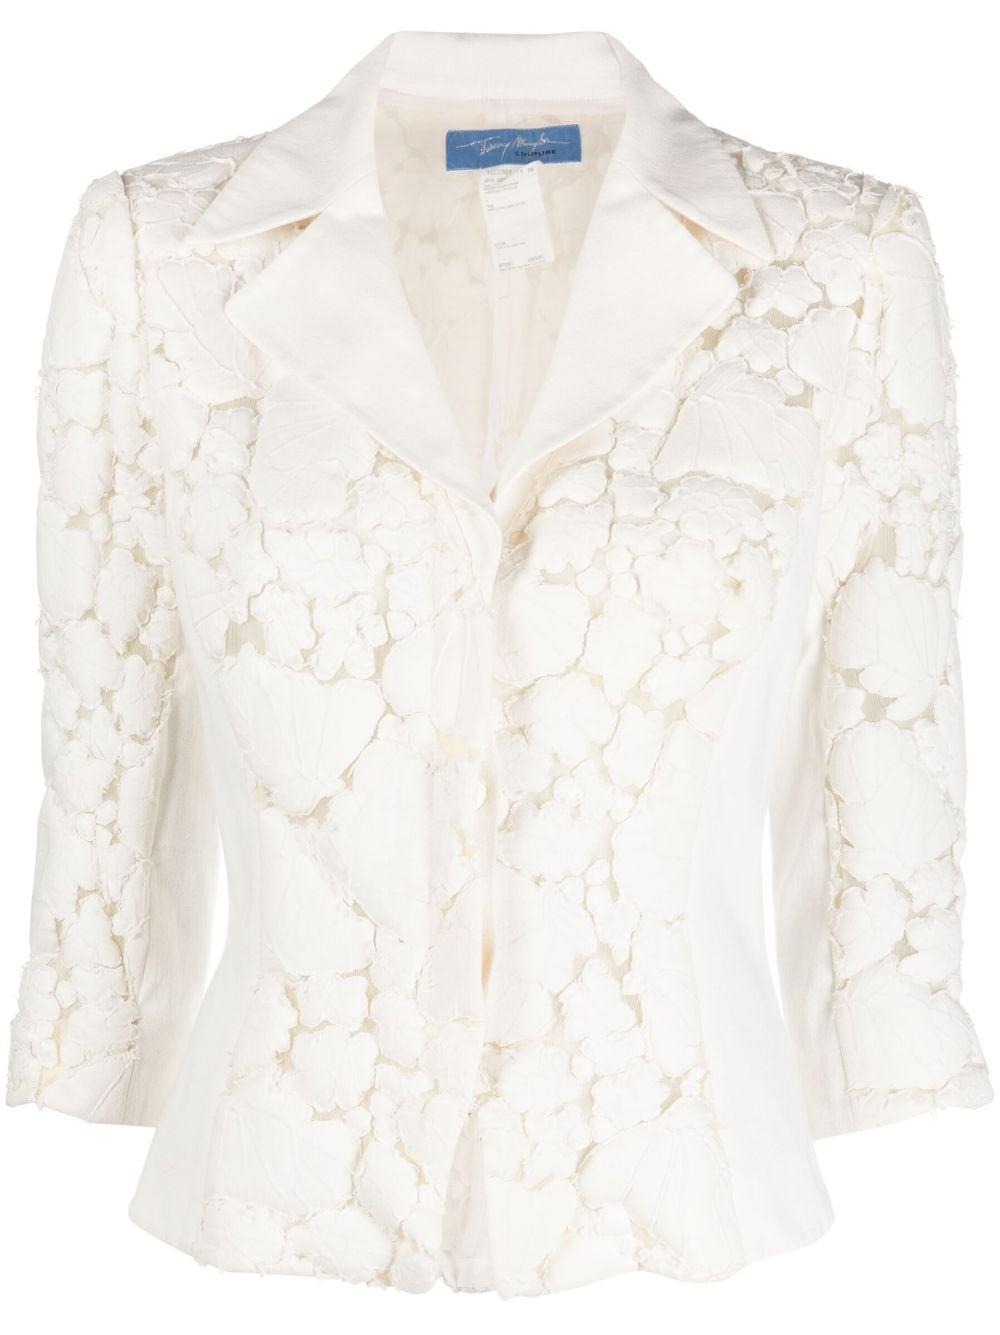 Thierry Mugler Couture White Jacket For Sale 2